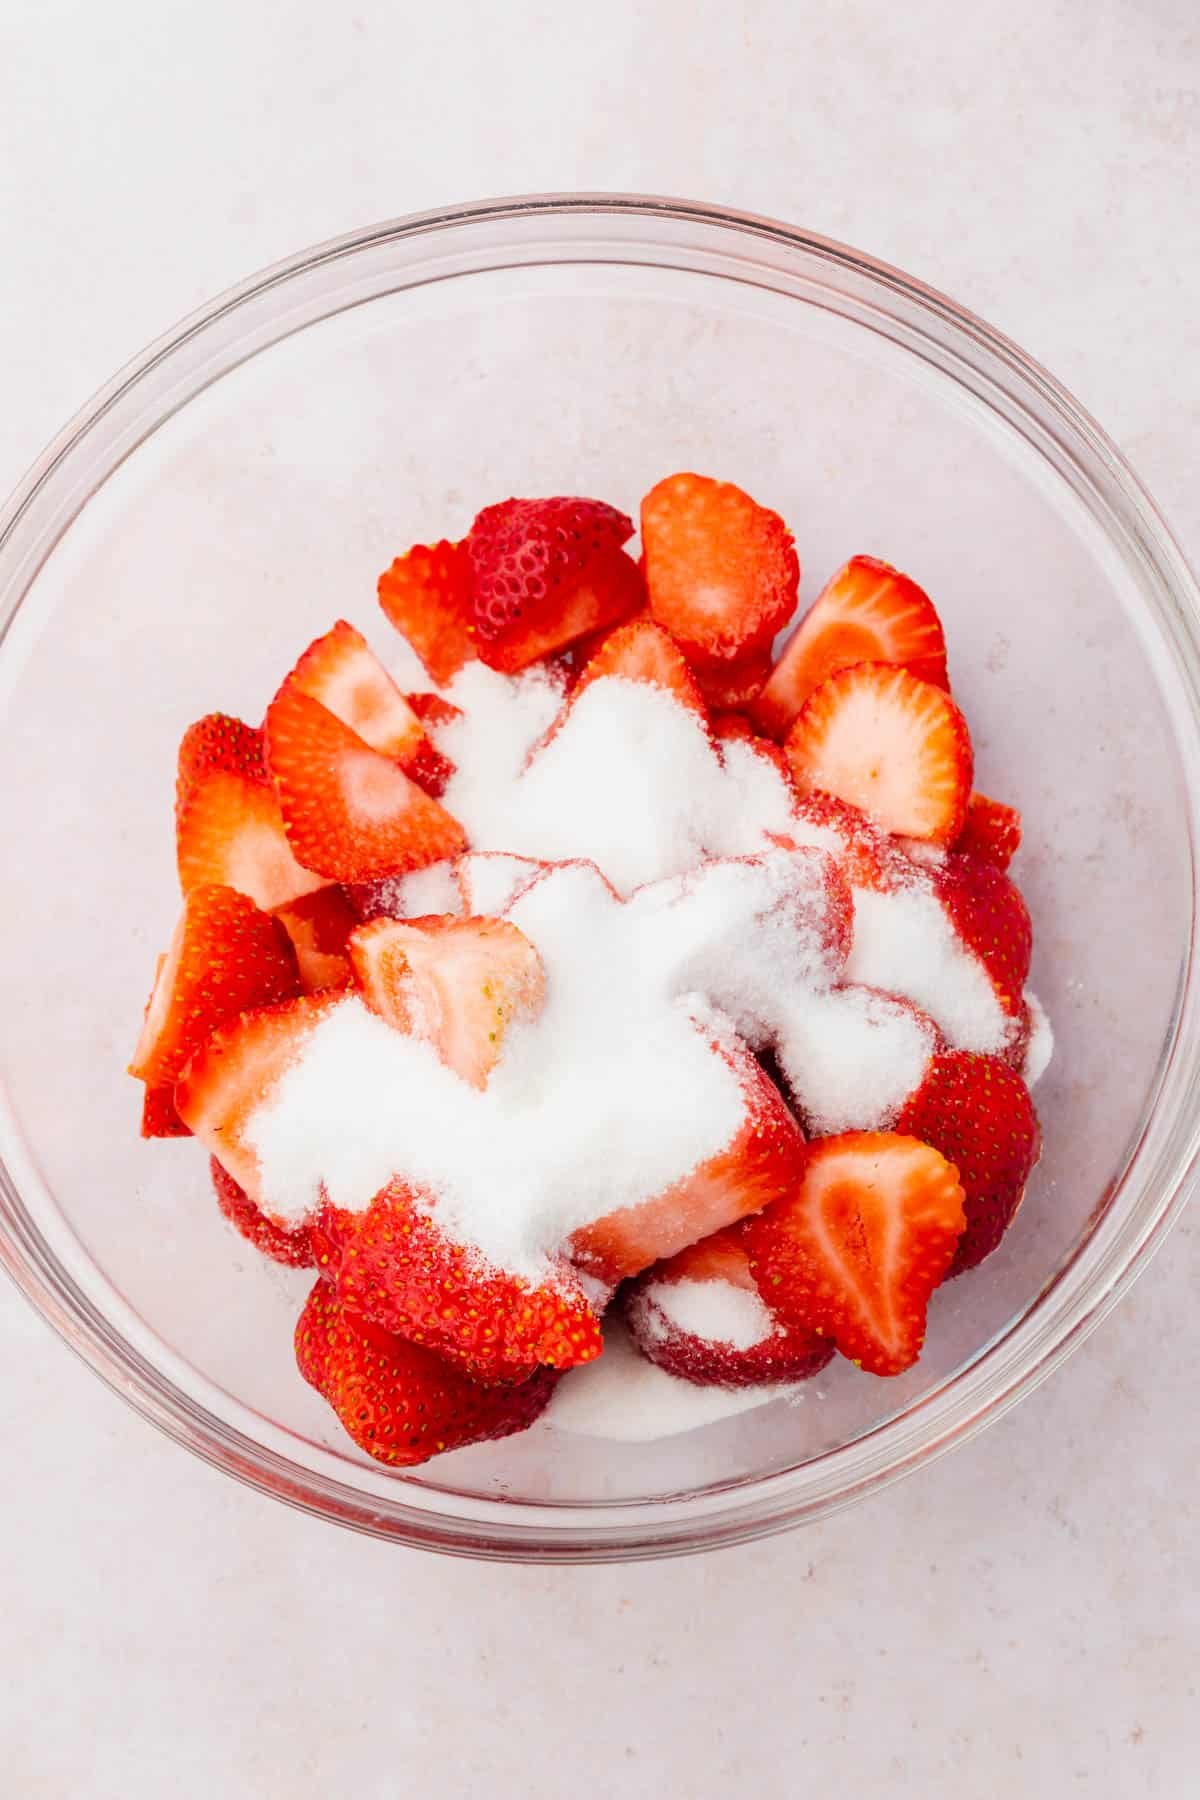 A glass mixing bowl with sliced strawberries and granulated sugar on top that have not been mixed.